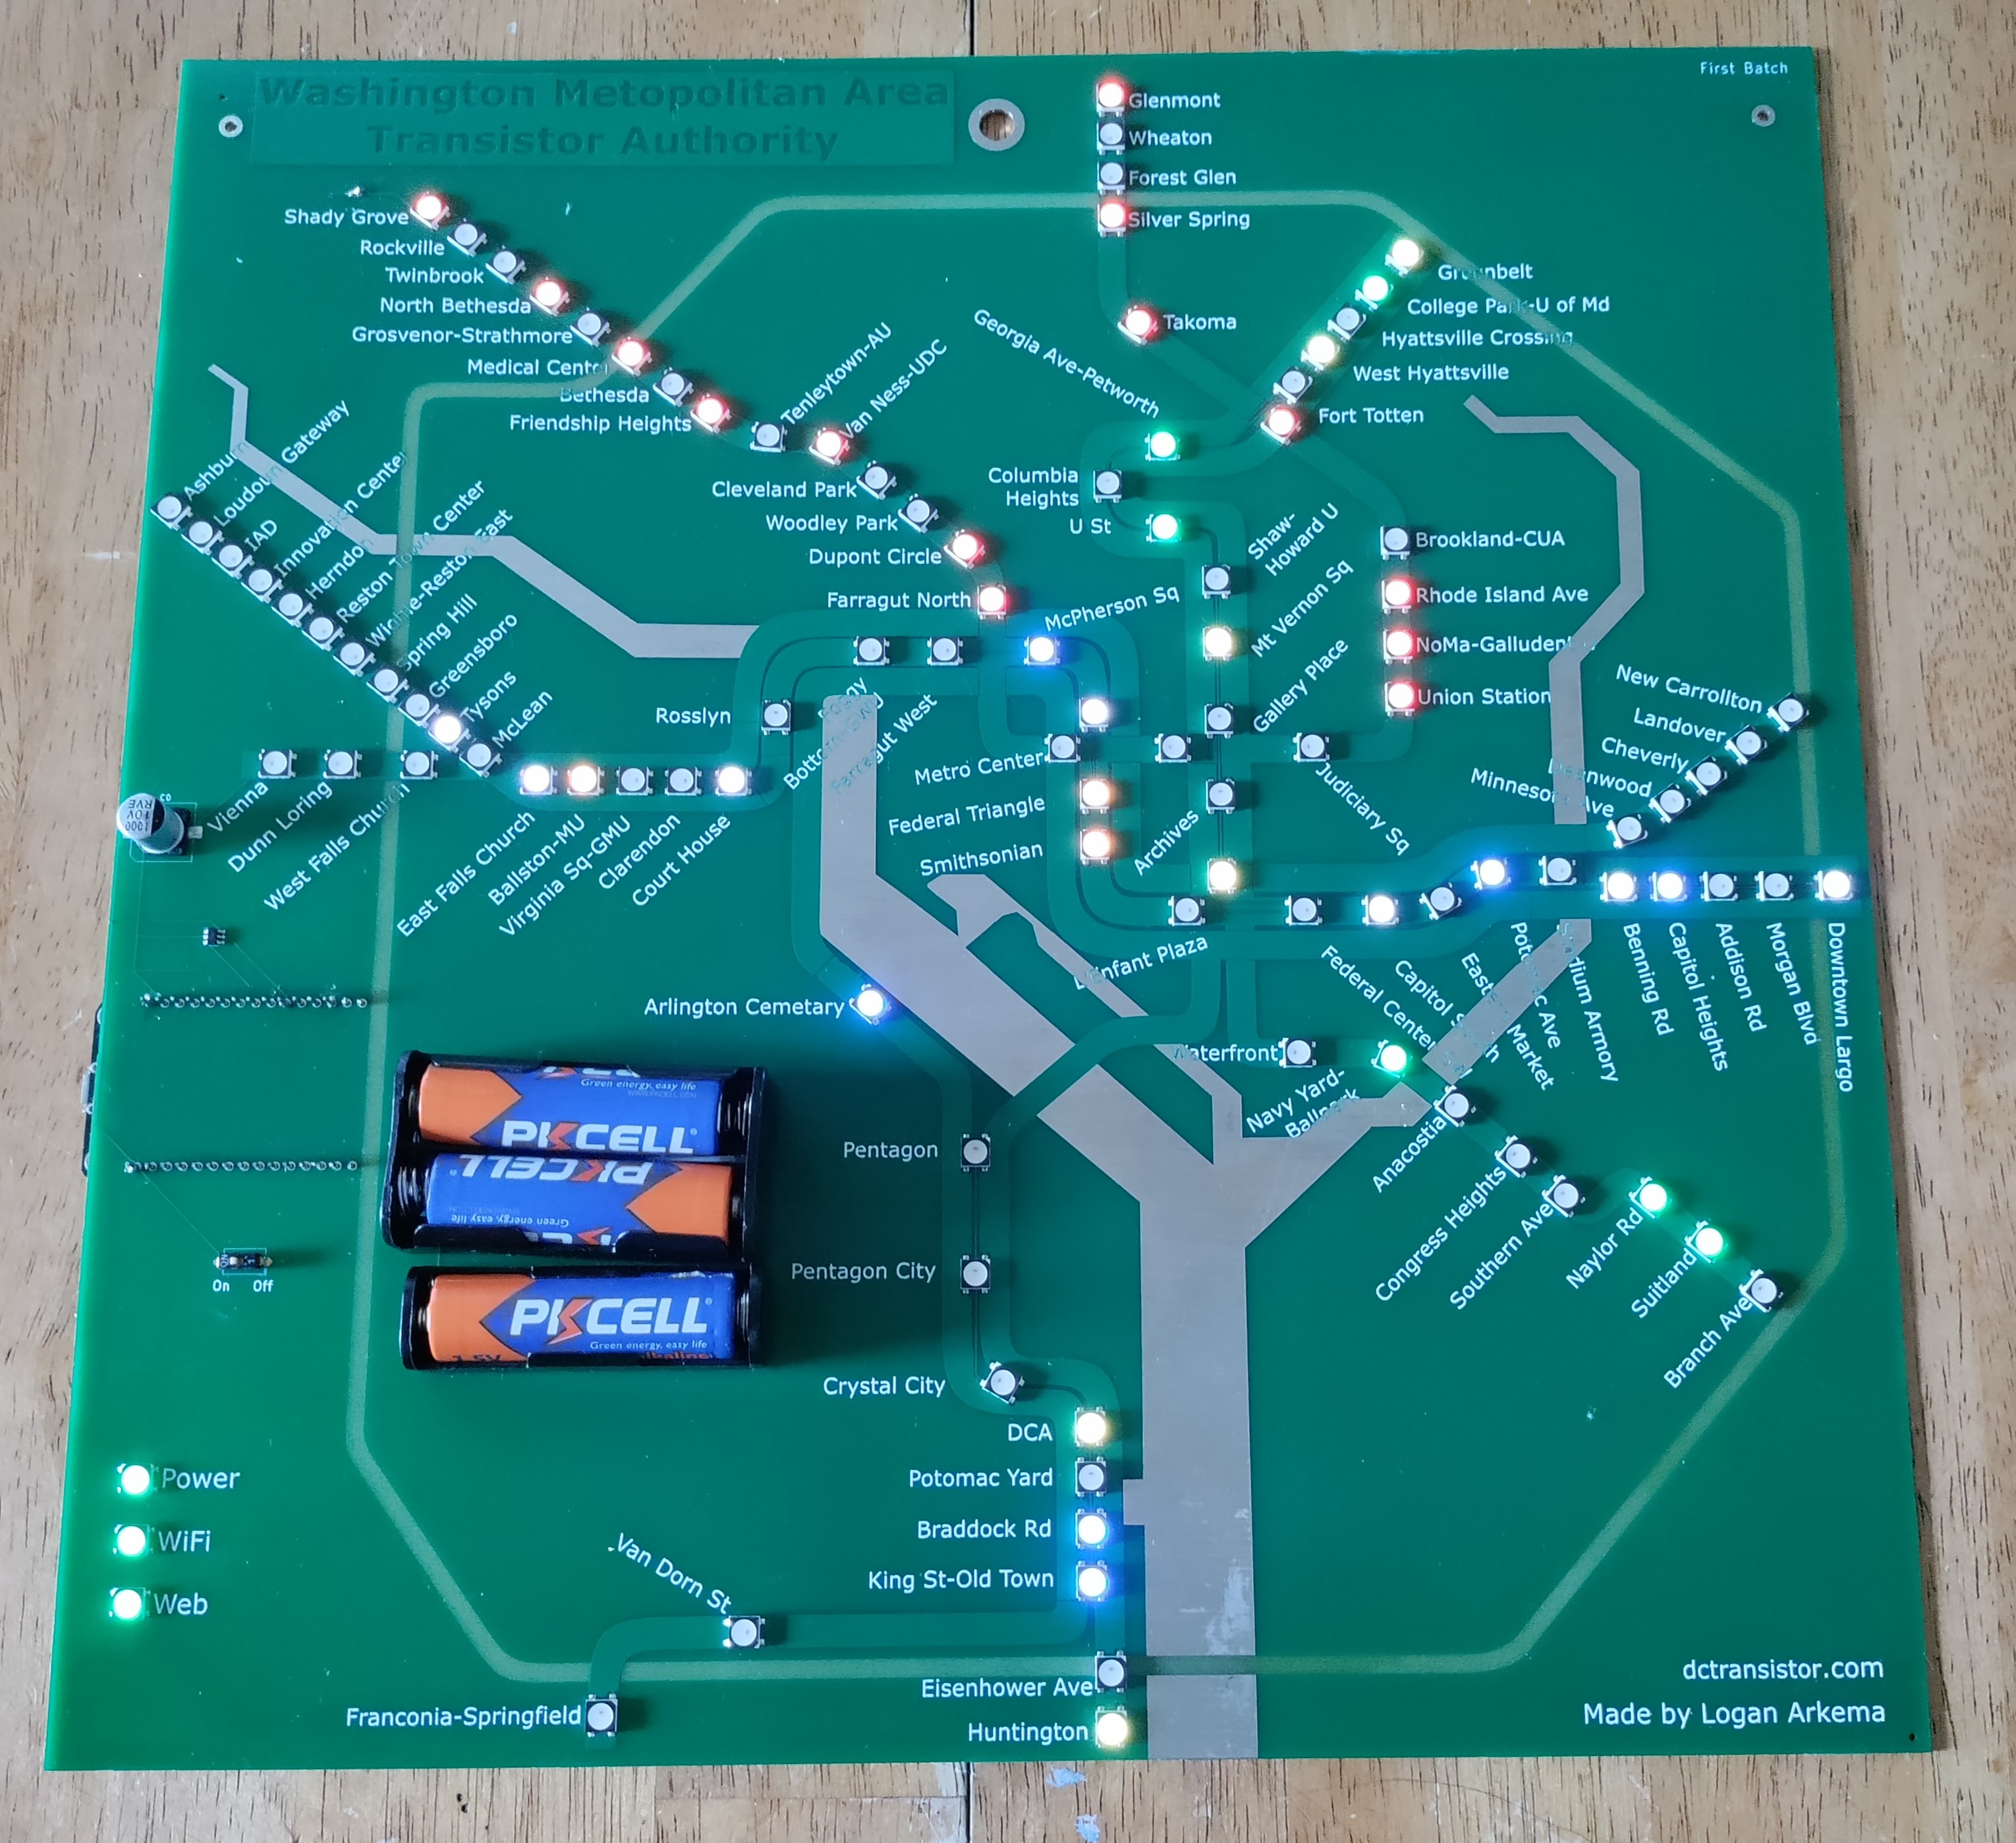 Large picture of a DCTransistor board, powered on to show live train positions. The board is programmable circuit board, mostly light green except for a dark green title and dark green rectangles representing the DC metro train lines, a beige boundary representing the beltway, and silver representing the Potomac and Anacostia rivers. It is designed to represent the DC Metro System map.